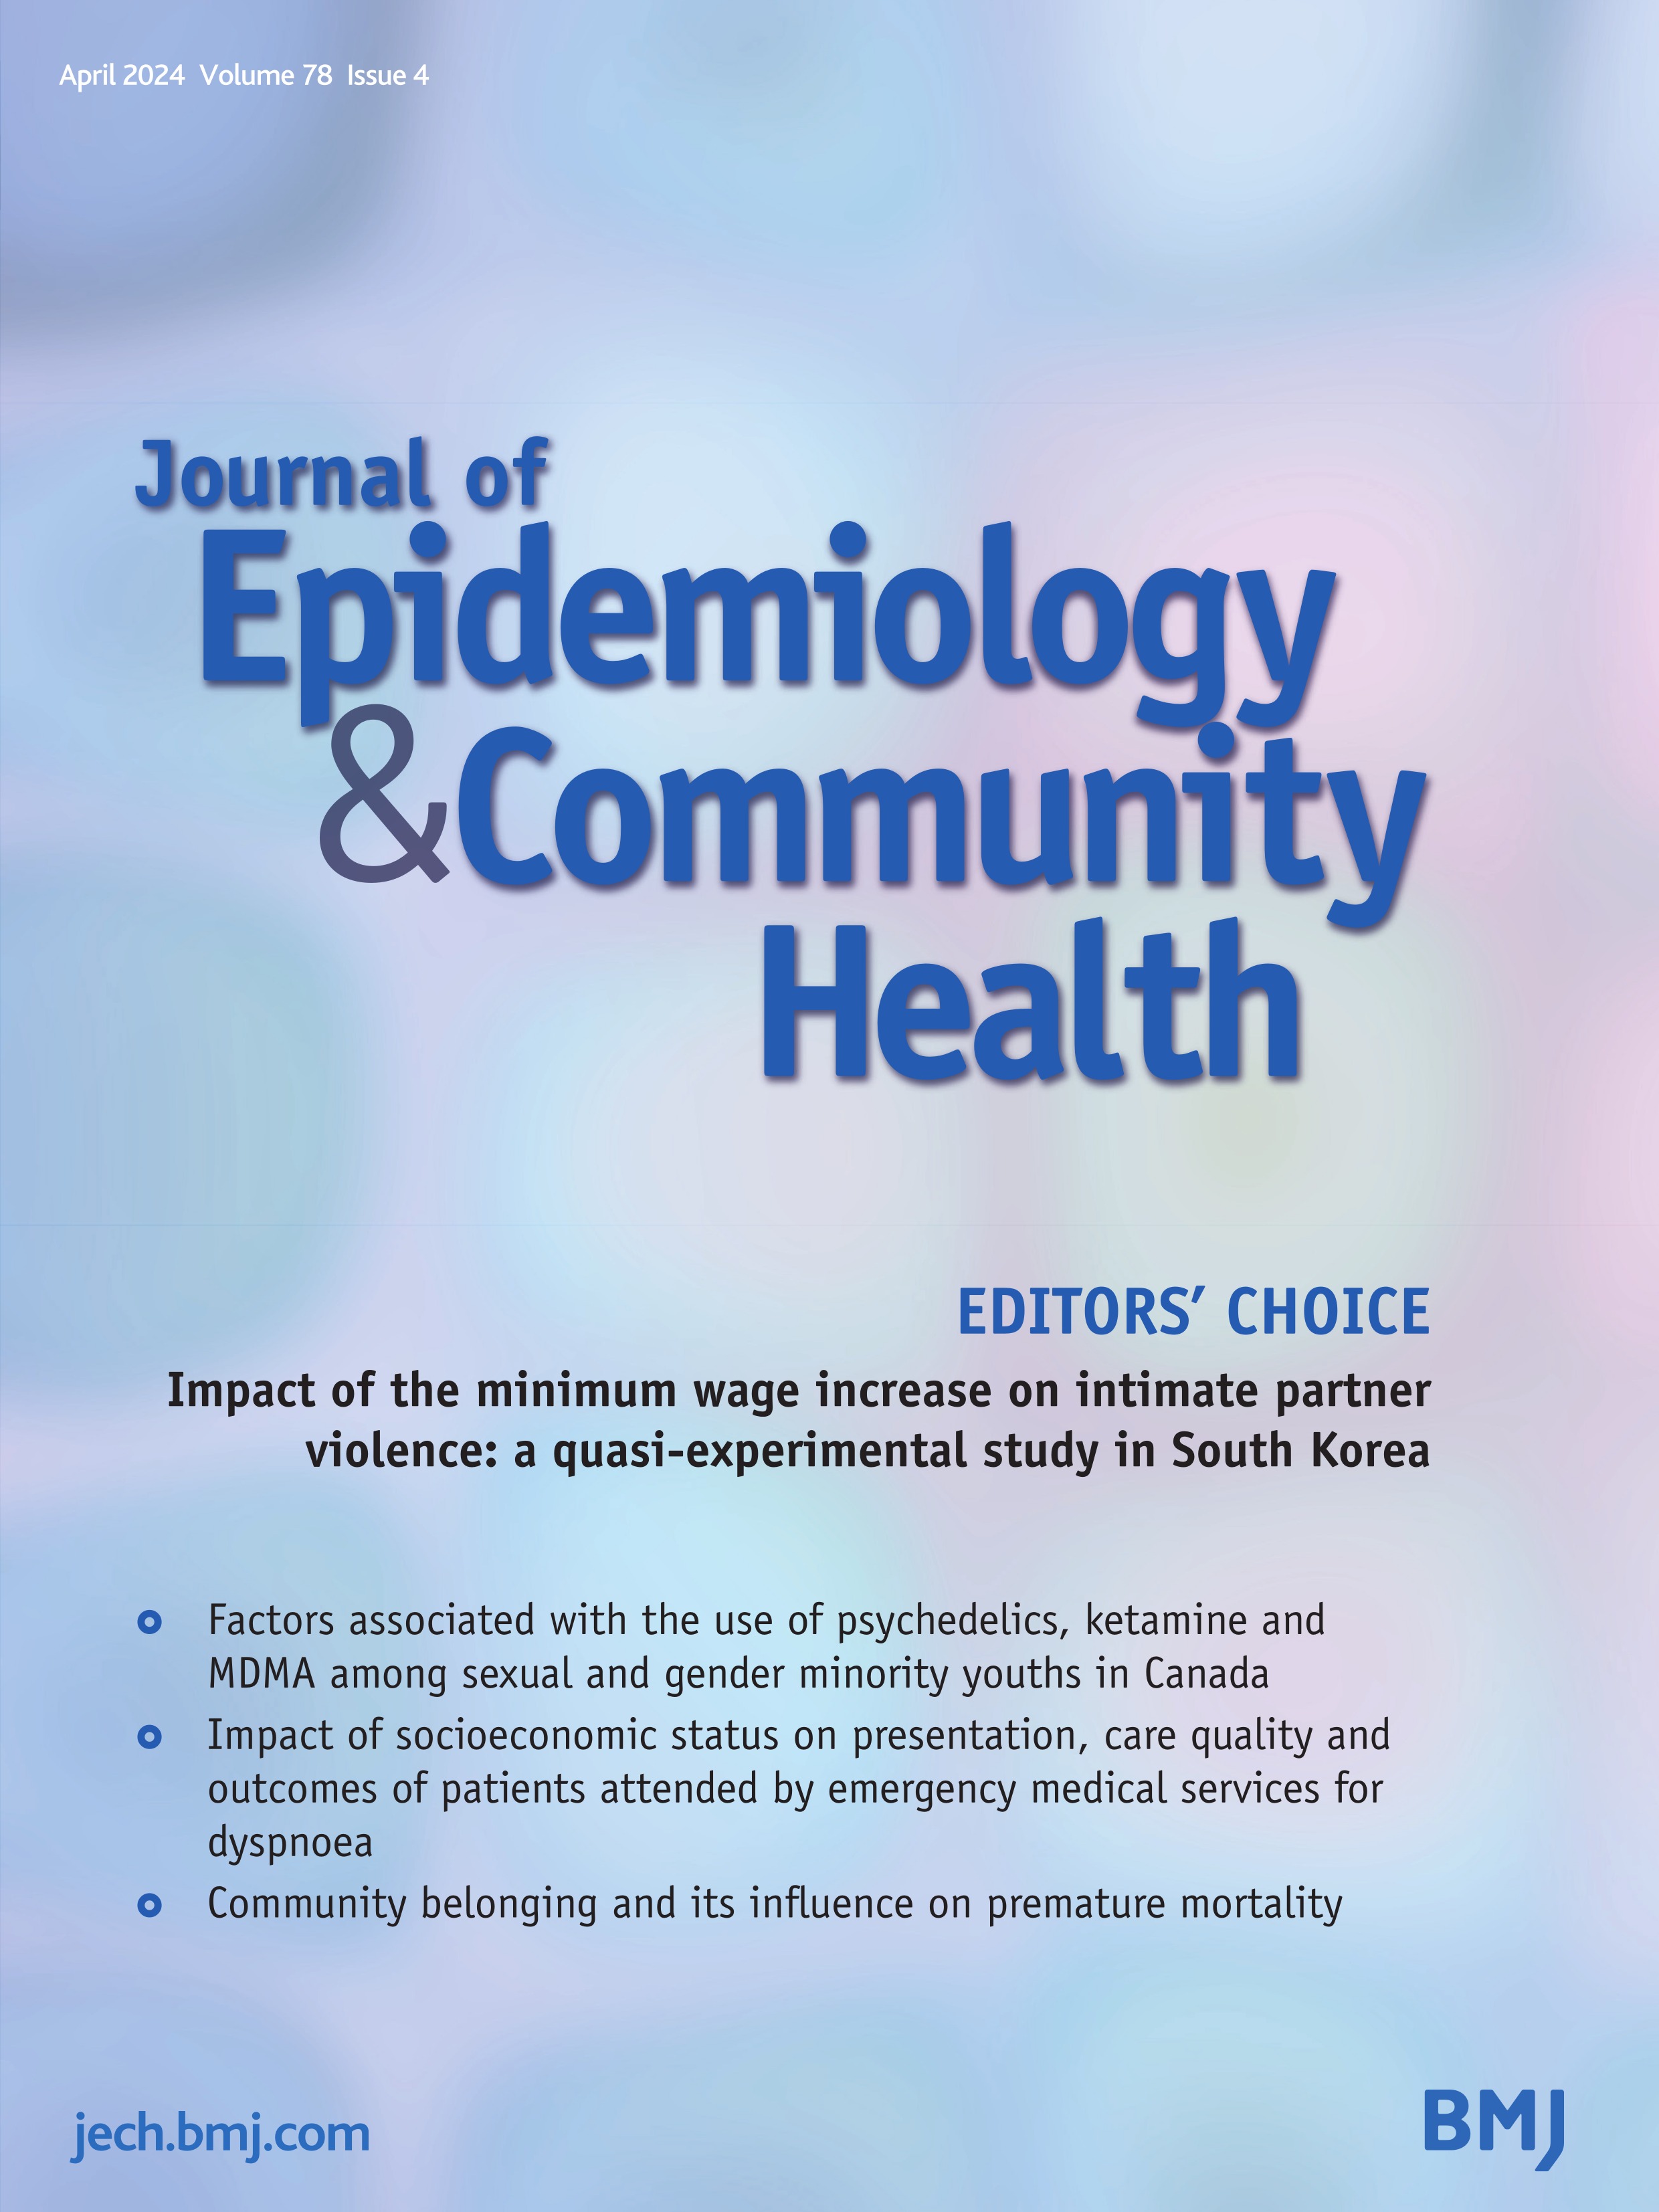 Impact of socioeconomic status on presentation, care quality and outcomes of patients attended by emergency medical services for dyspnoea: a population-based cohort study